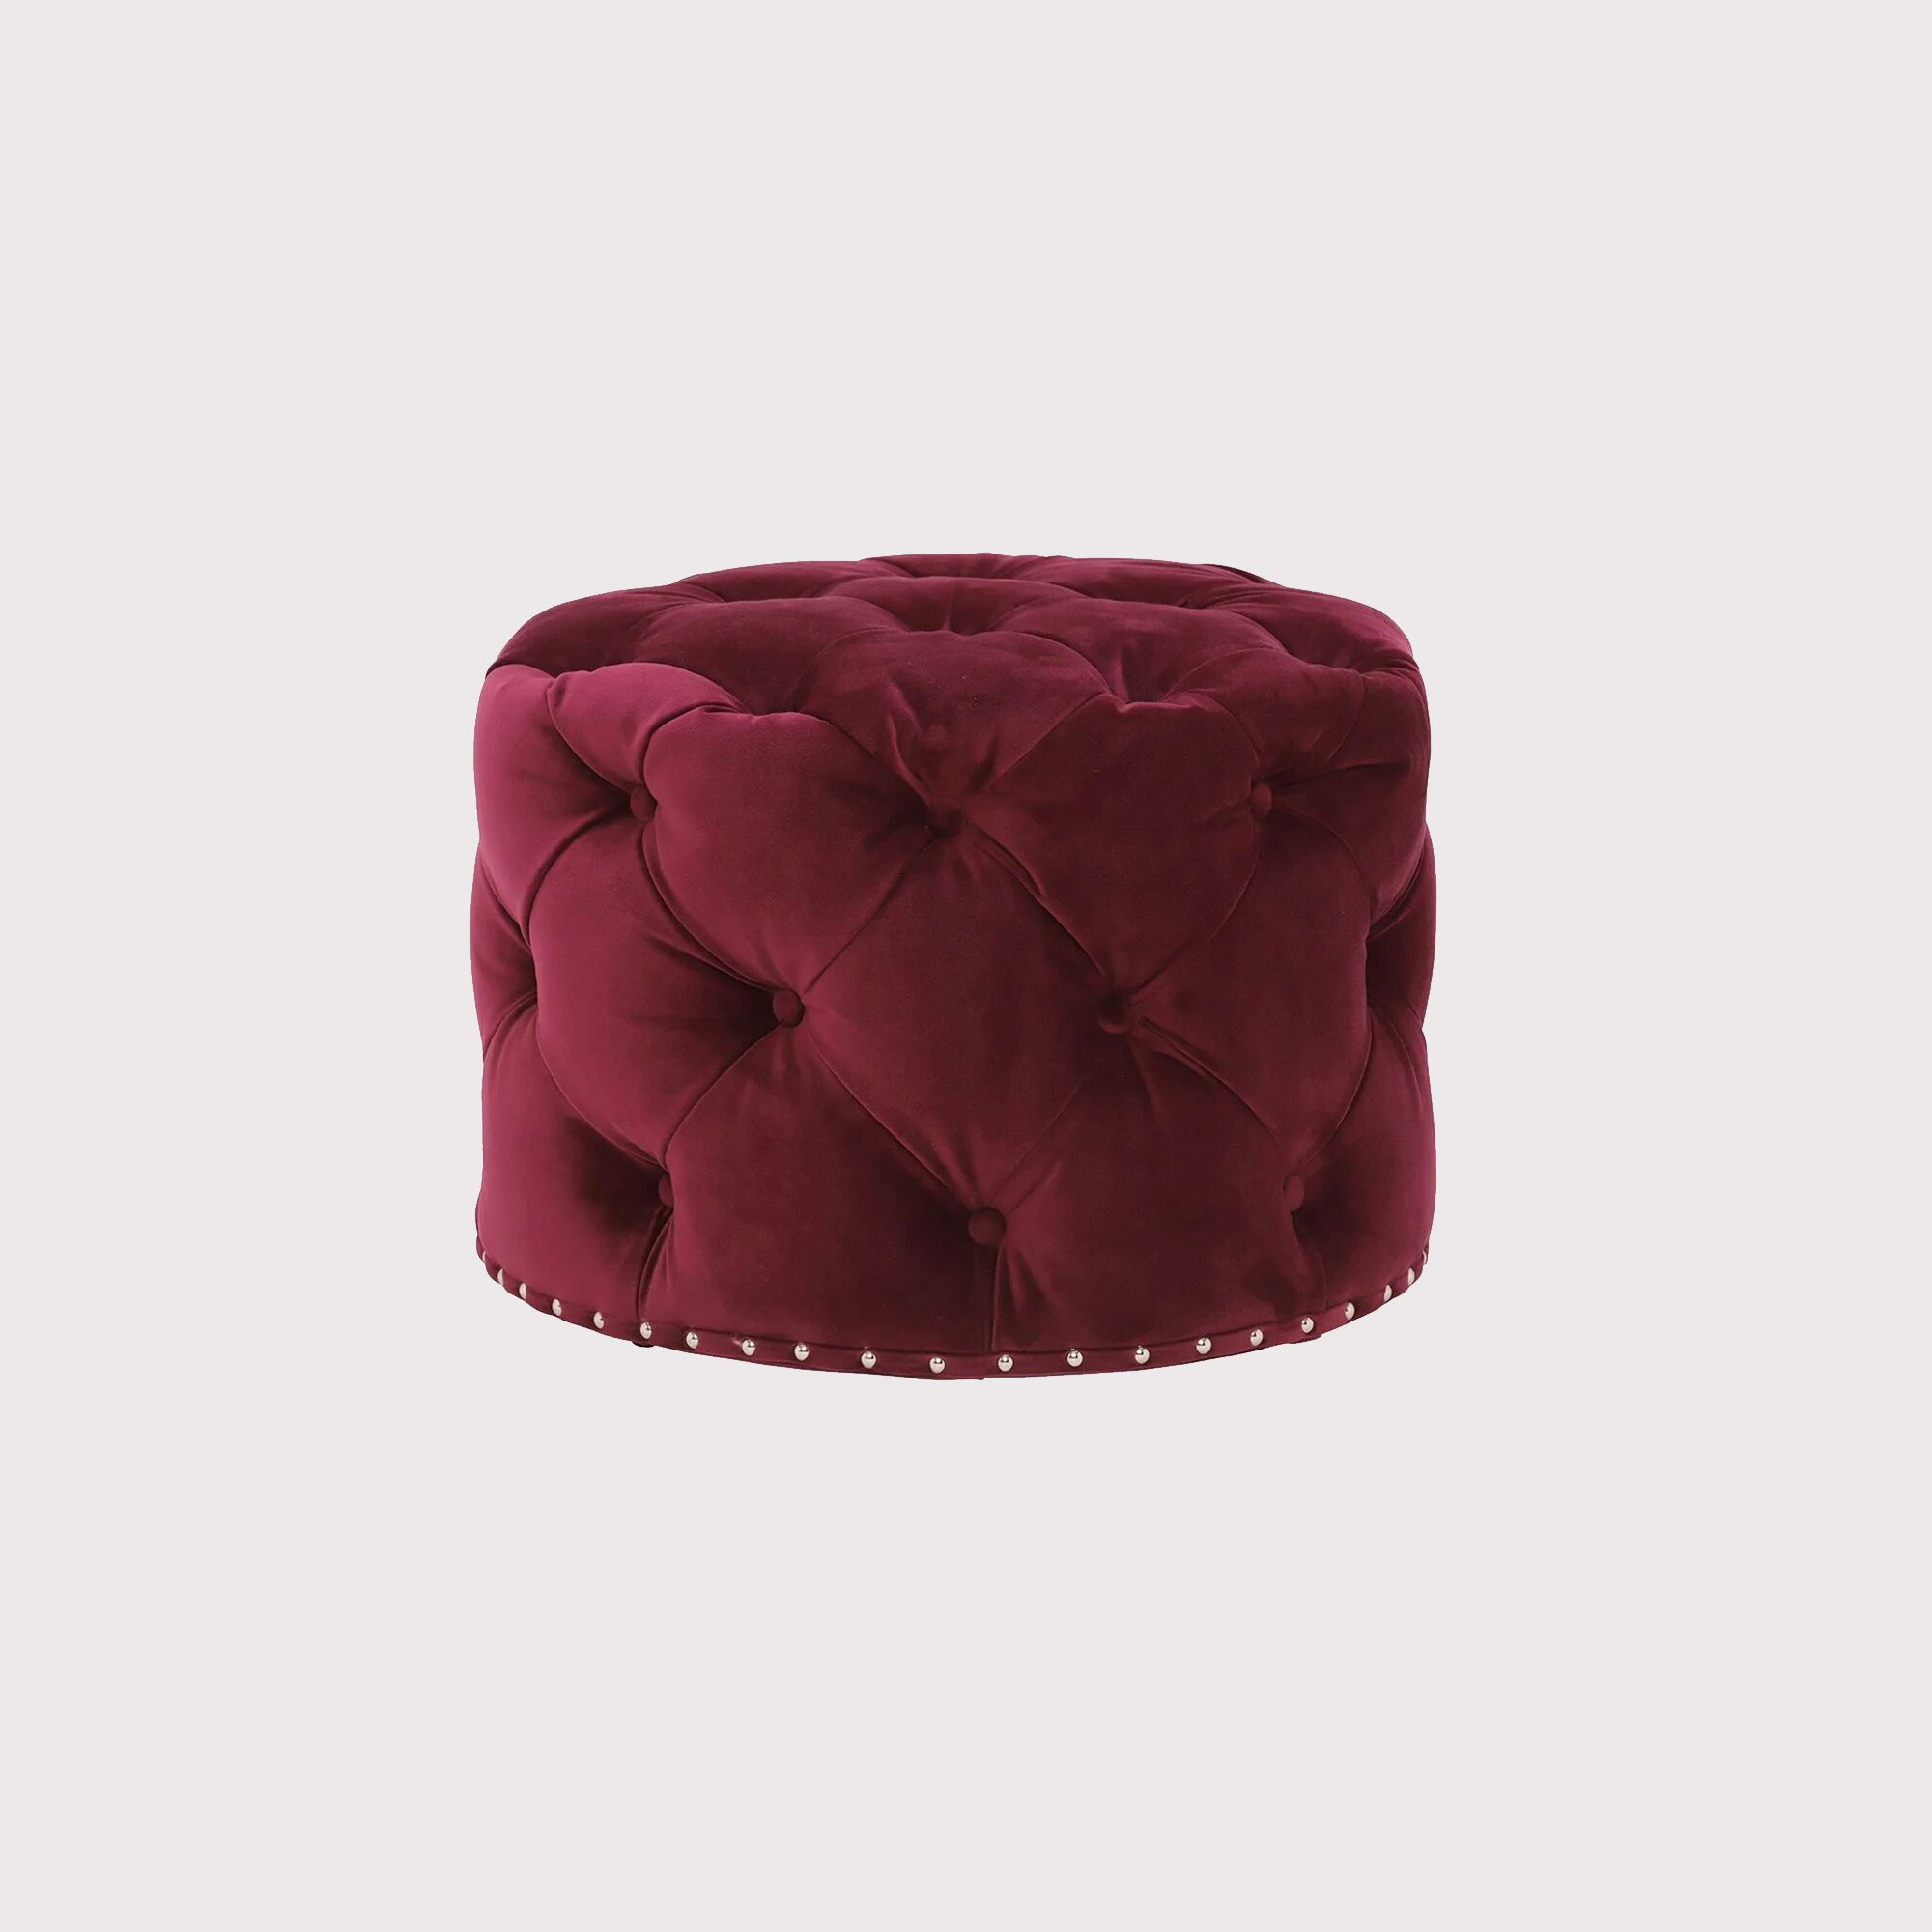 Timothy Oulton Lord Digsby Round Small Footstool, Red Fabric | Barker & Stonehouse